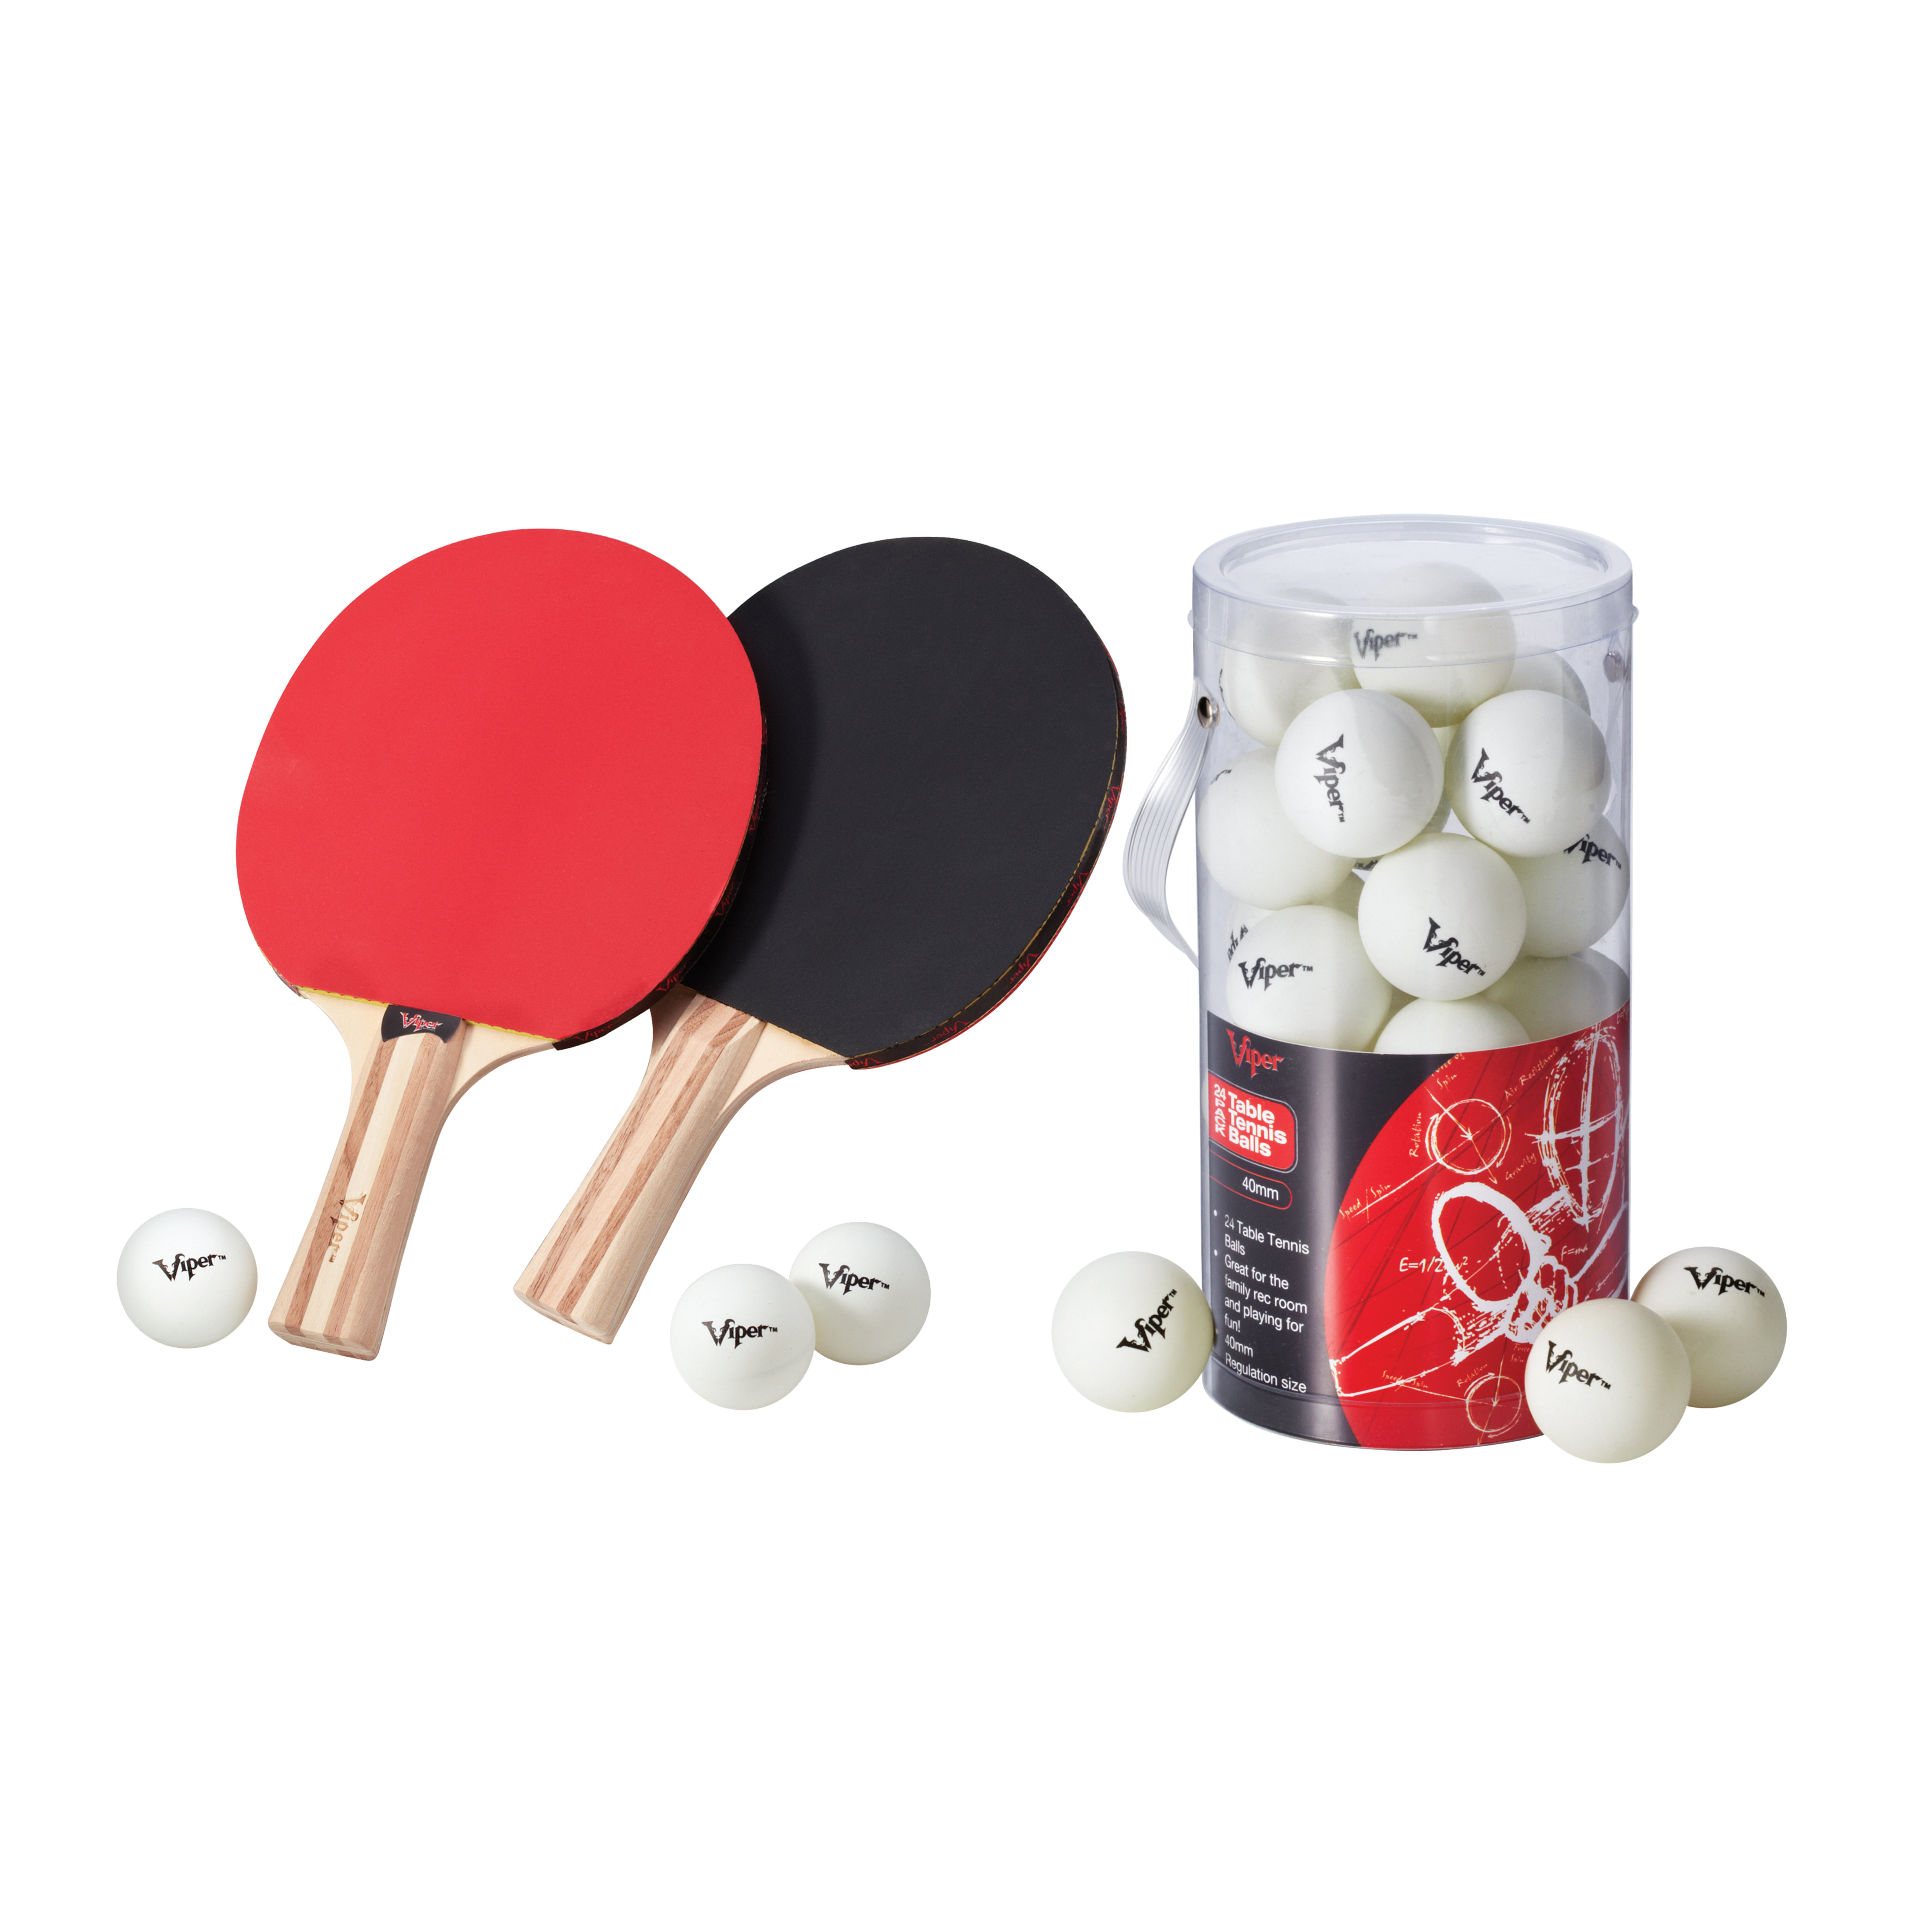  Pong on The Go Portable Table Tennis Playset - Comes